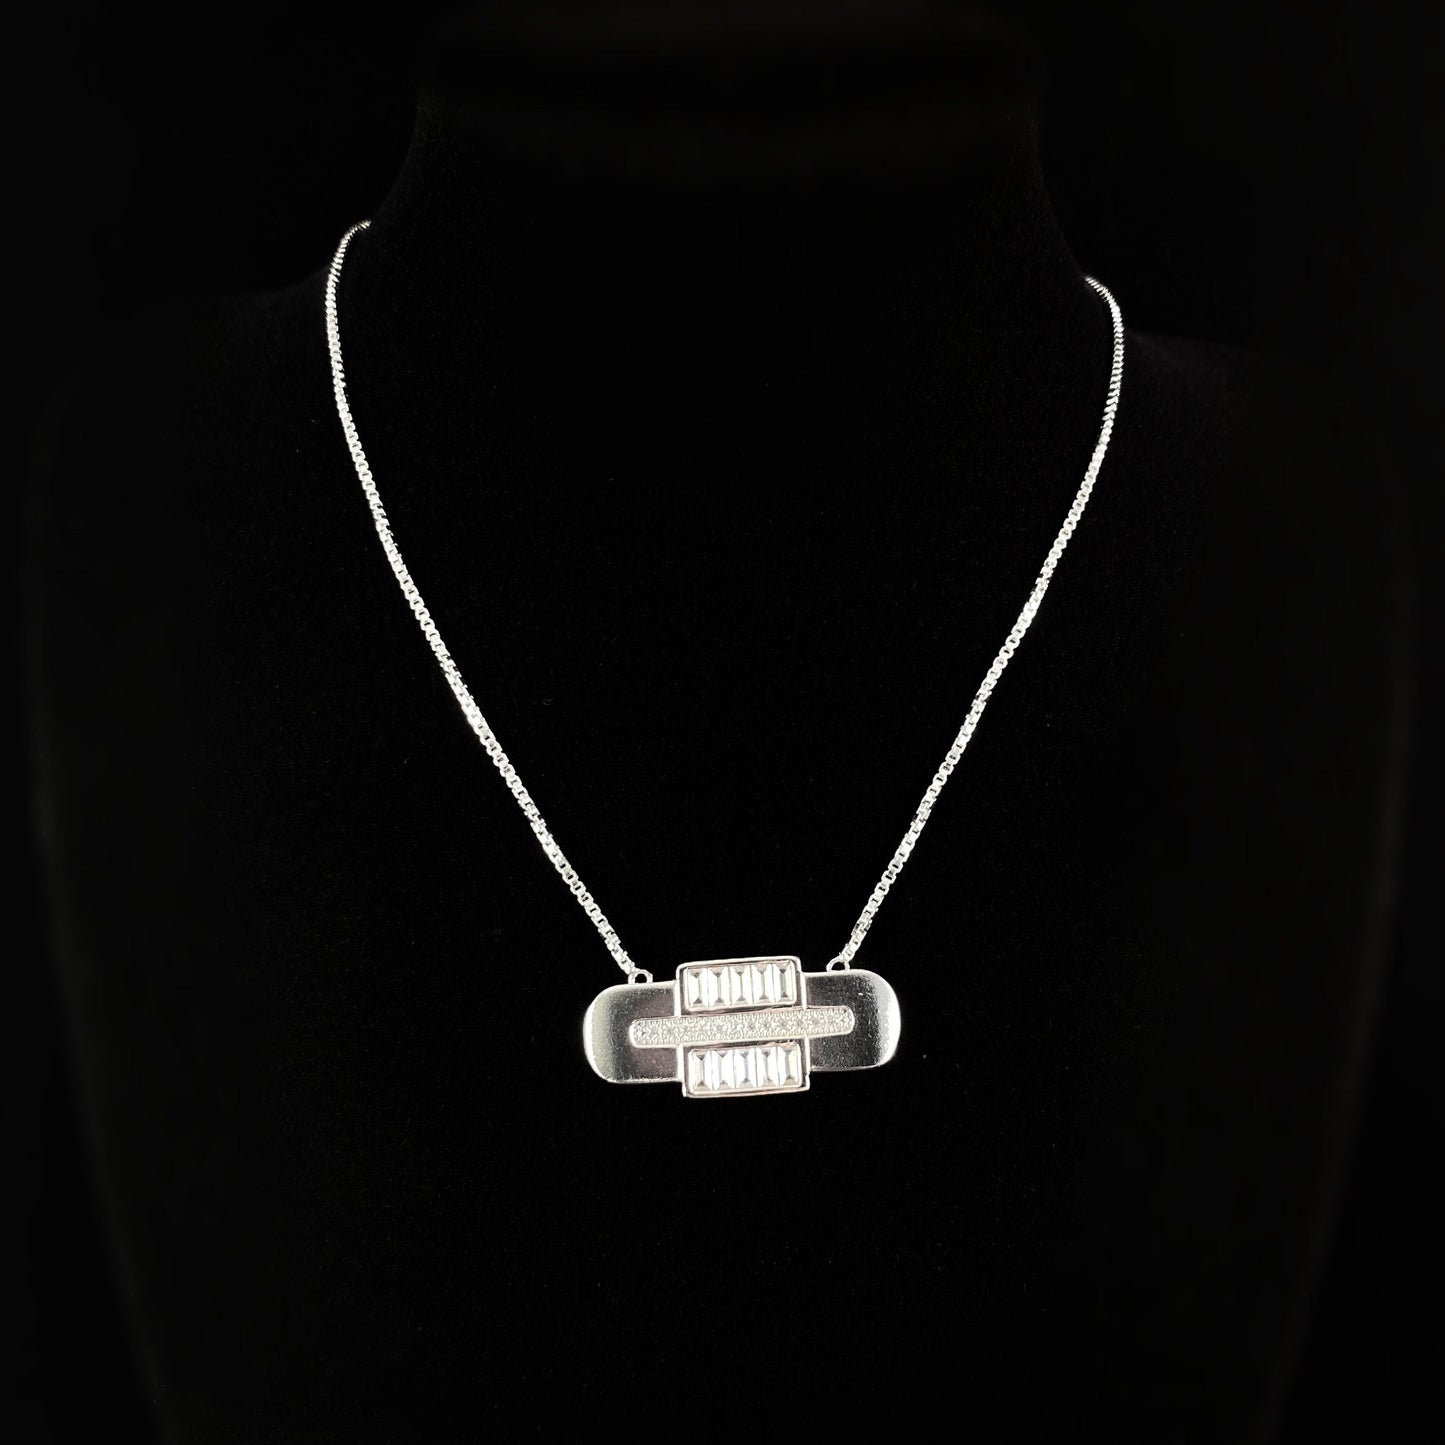 1920s Art Deco Necklace with Dainty Silver Pendant and CZ Crystal Accents - Century